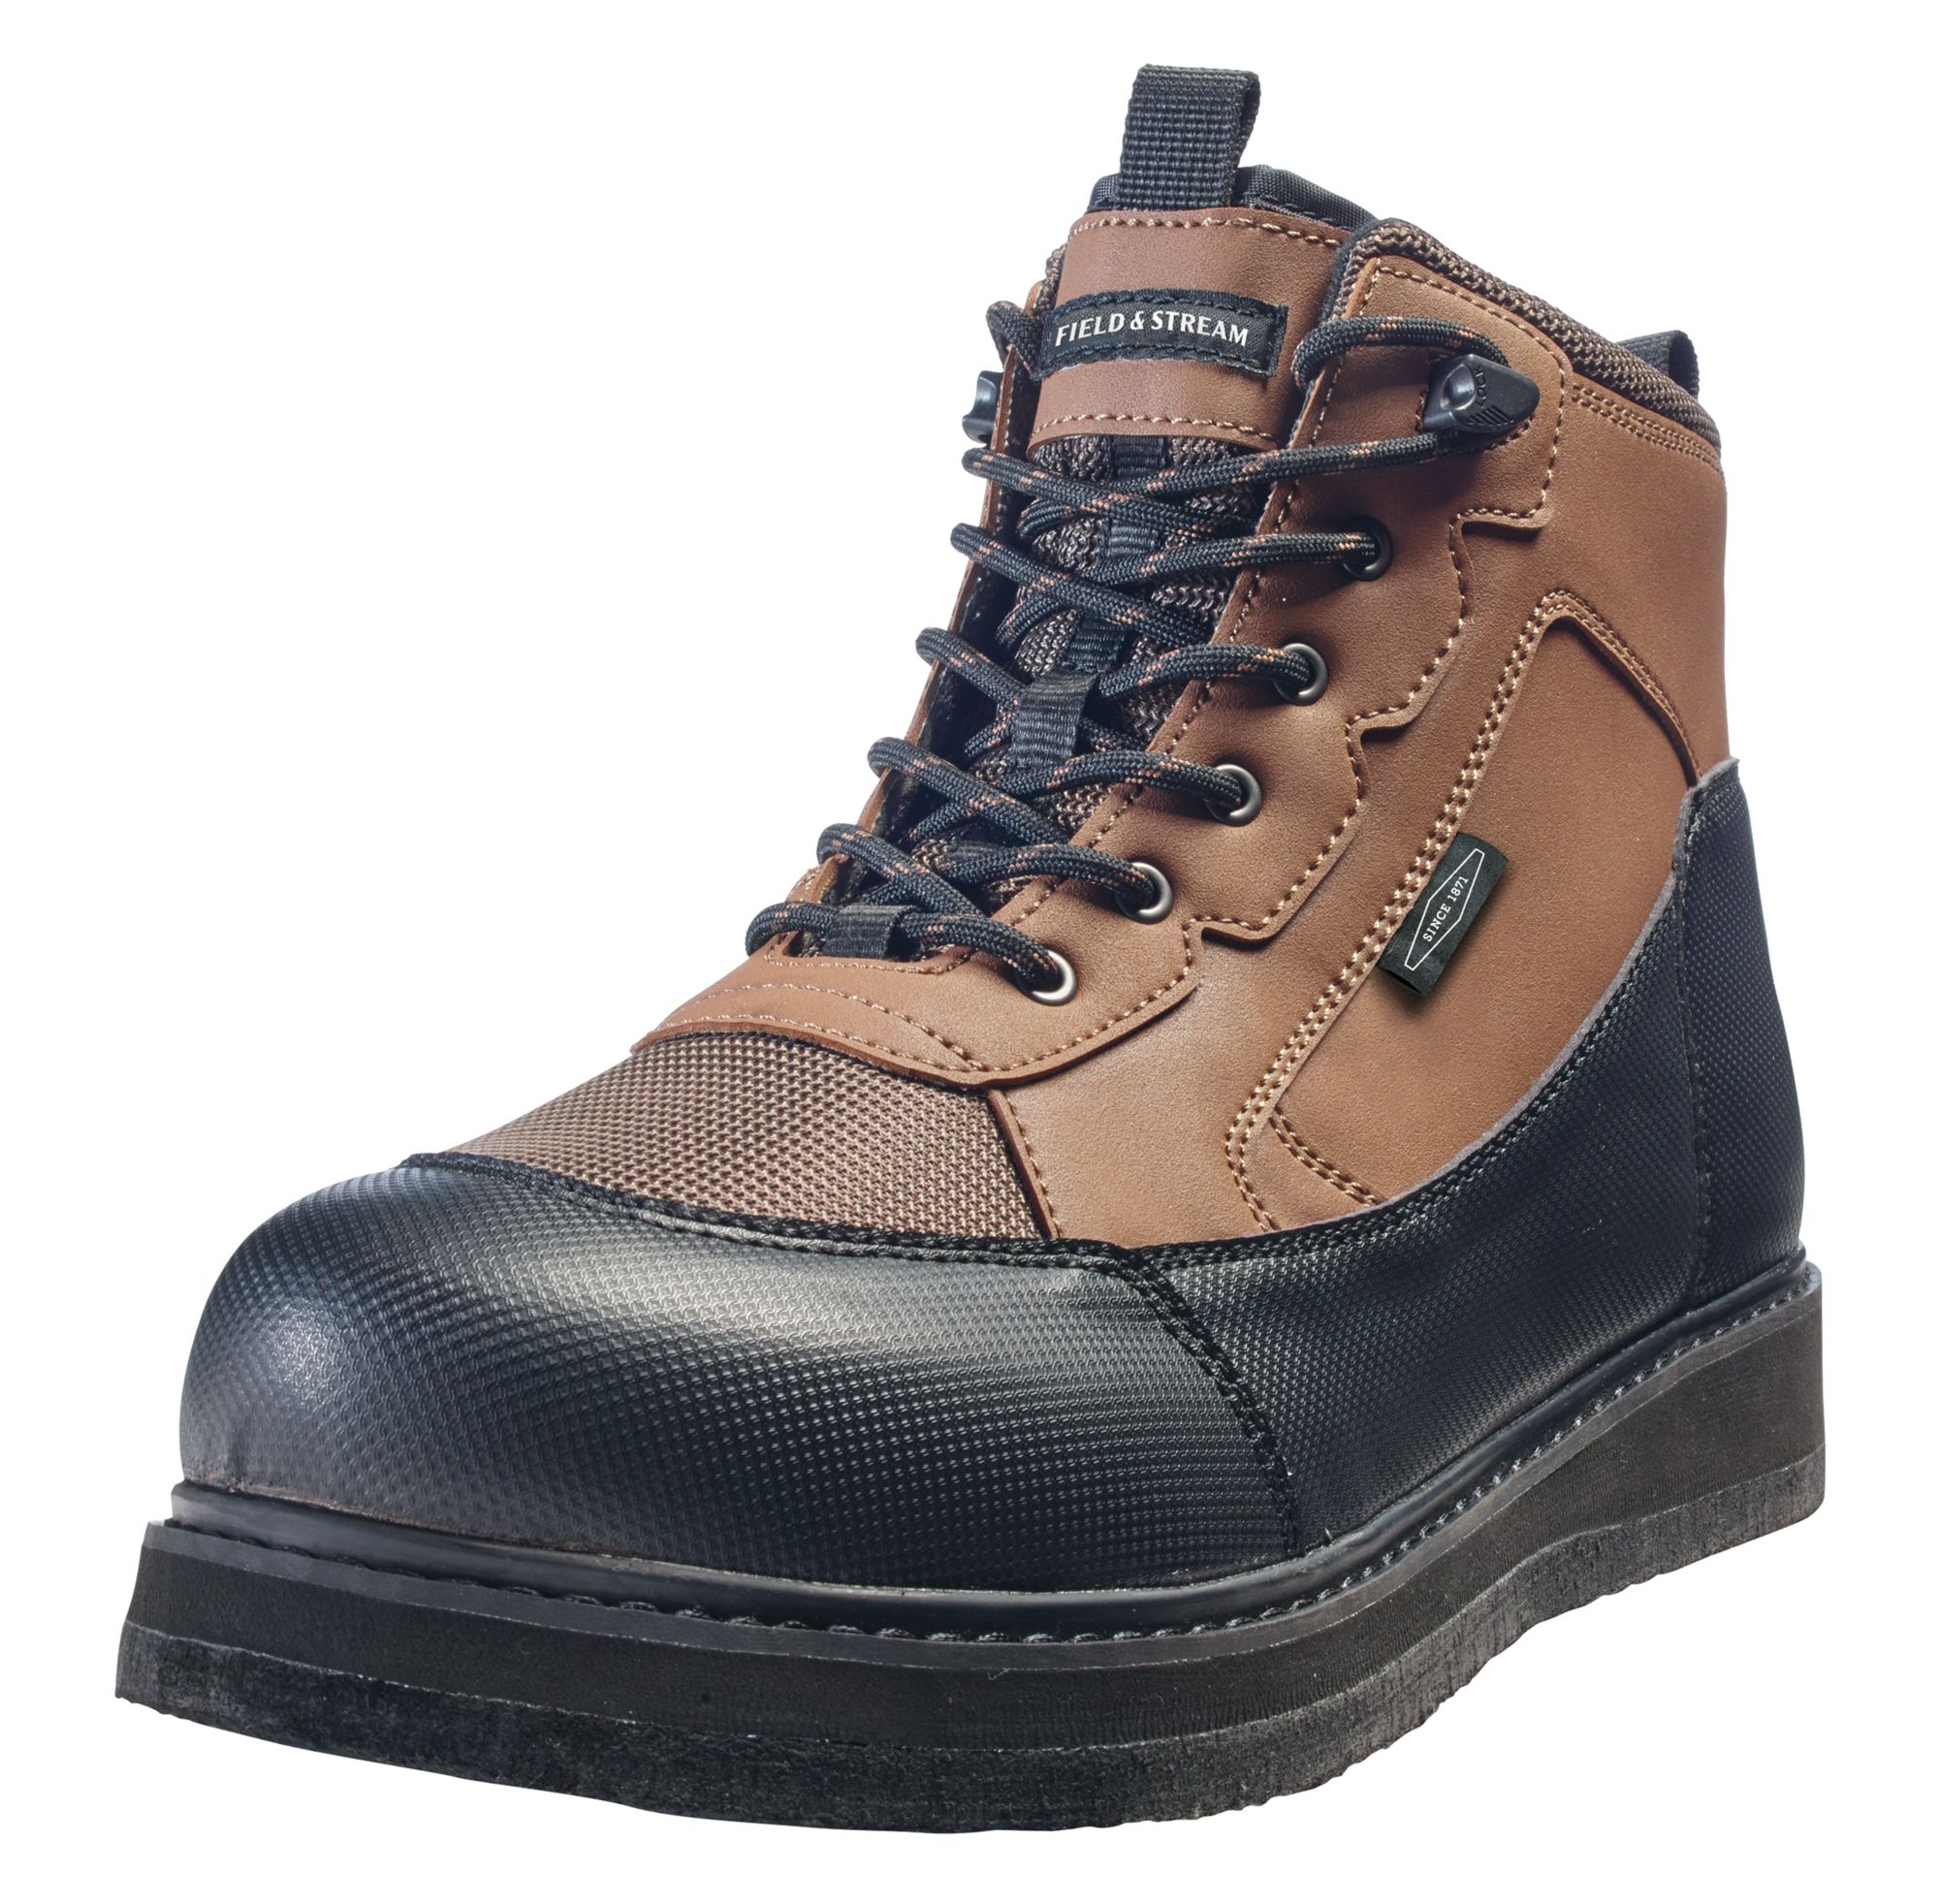 steel toe wading boots